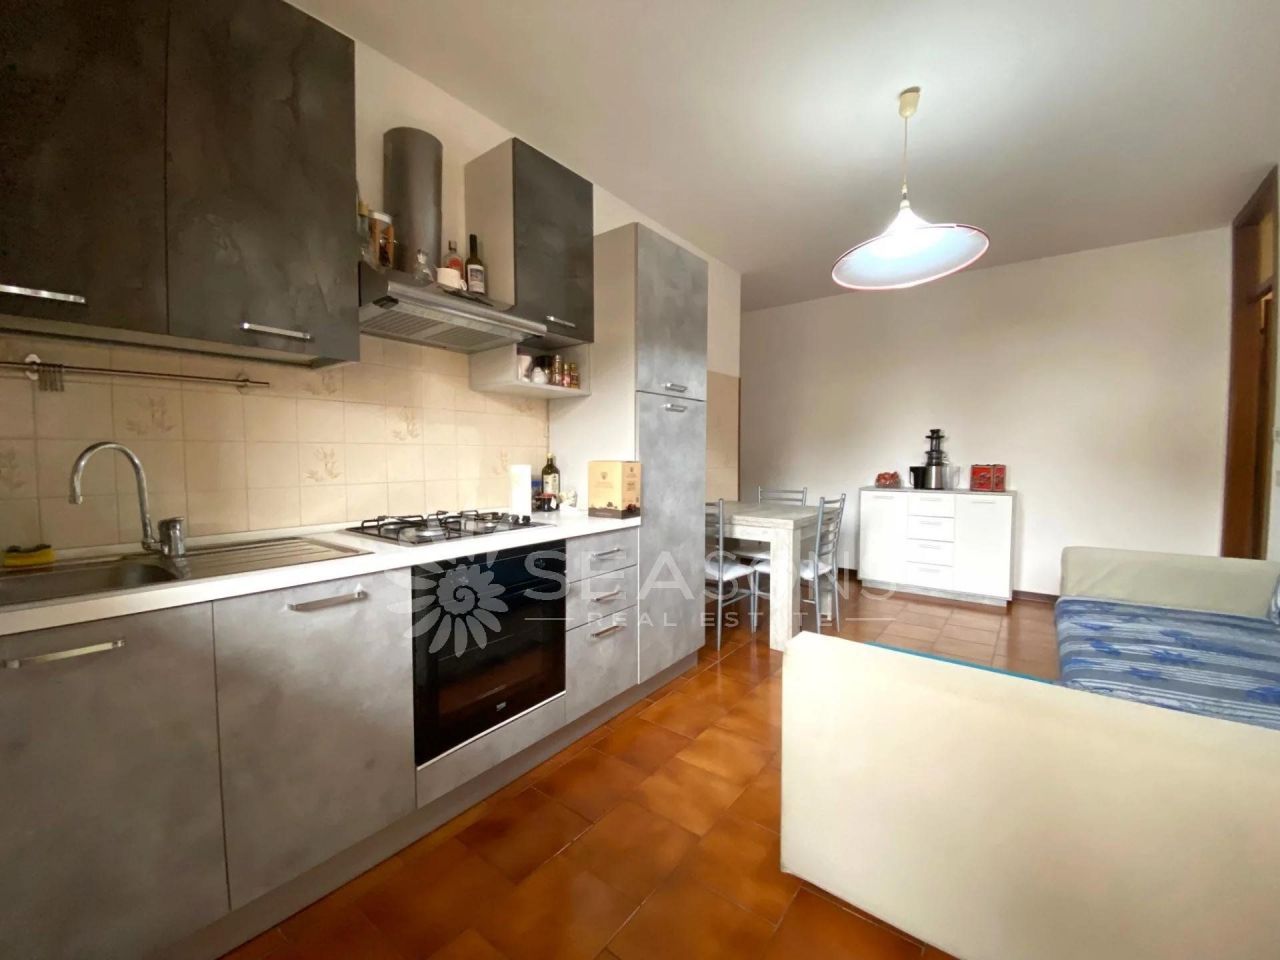 Flat in Latisana, Italy - picture 1